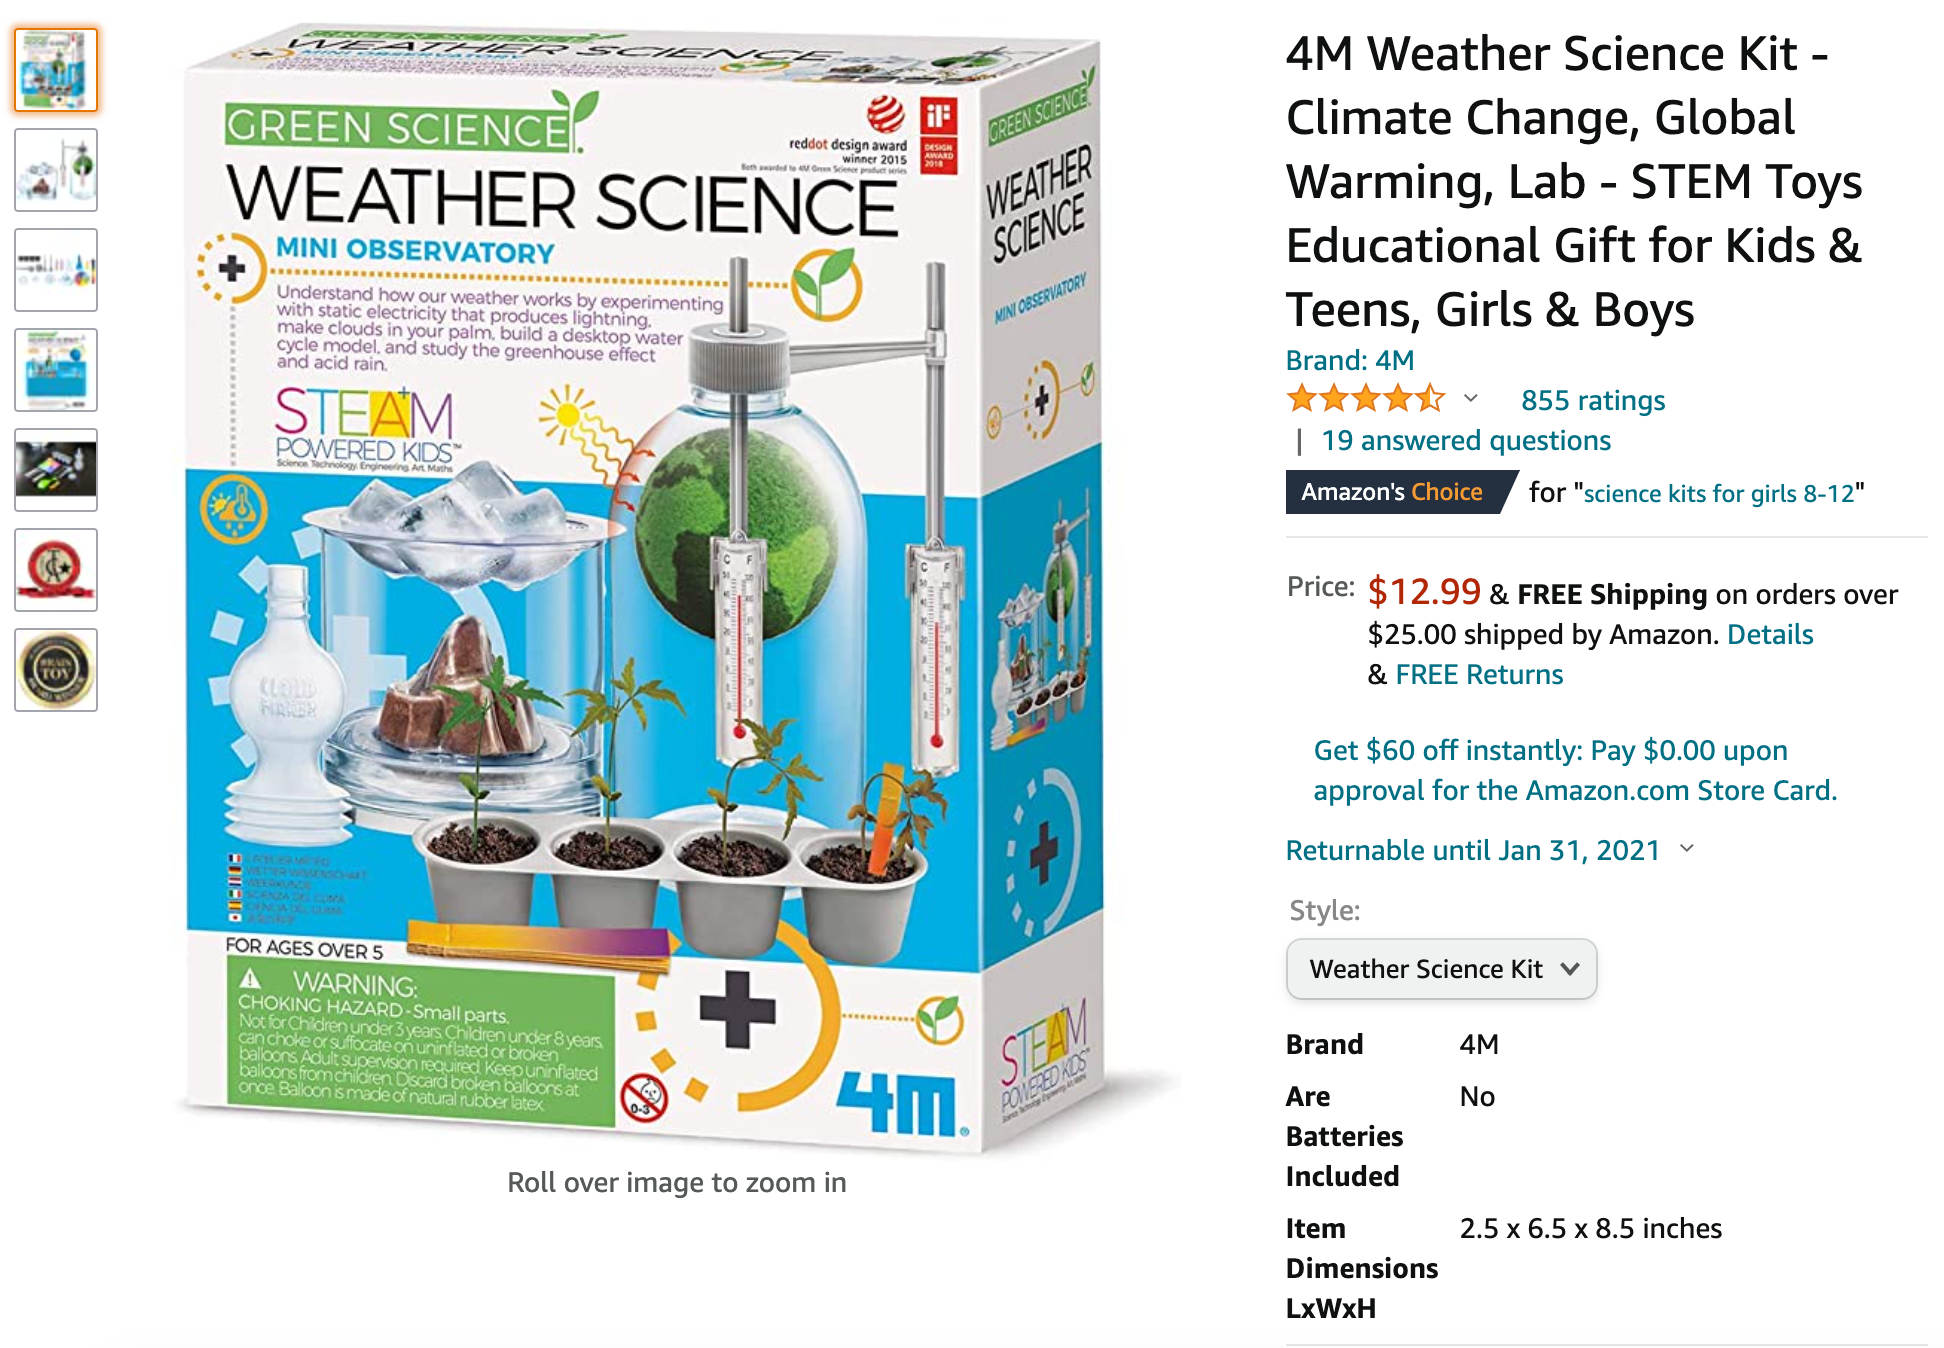 4M Weather Science Kit - Climate Change, Global Warming, Lab - STEM Toys Educational Gift for Kids.jpg